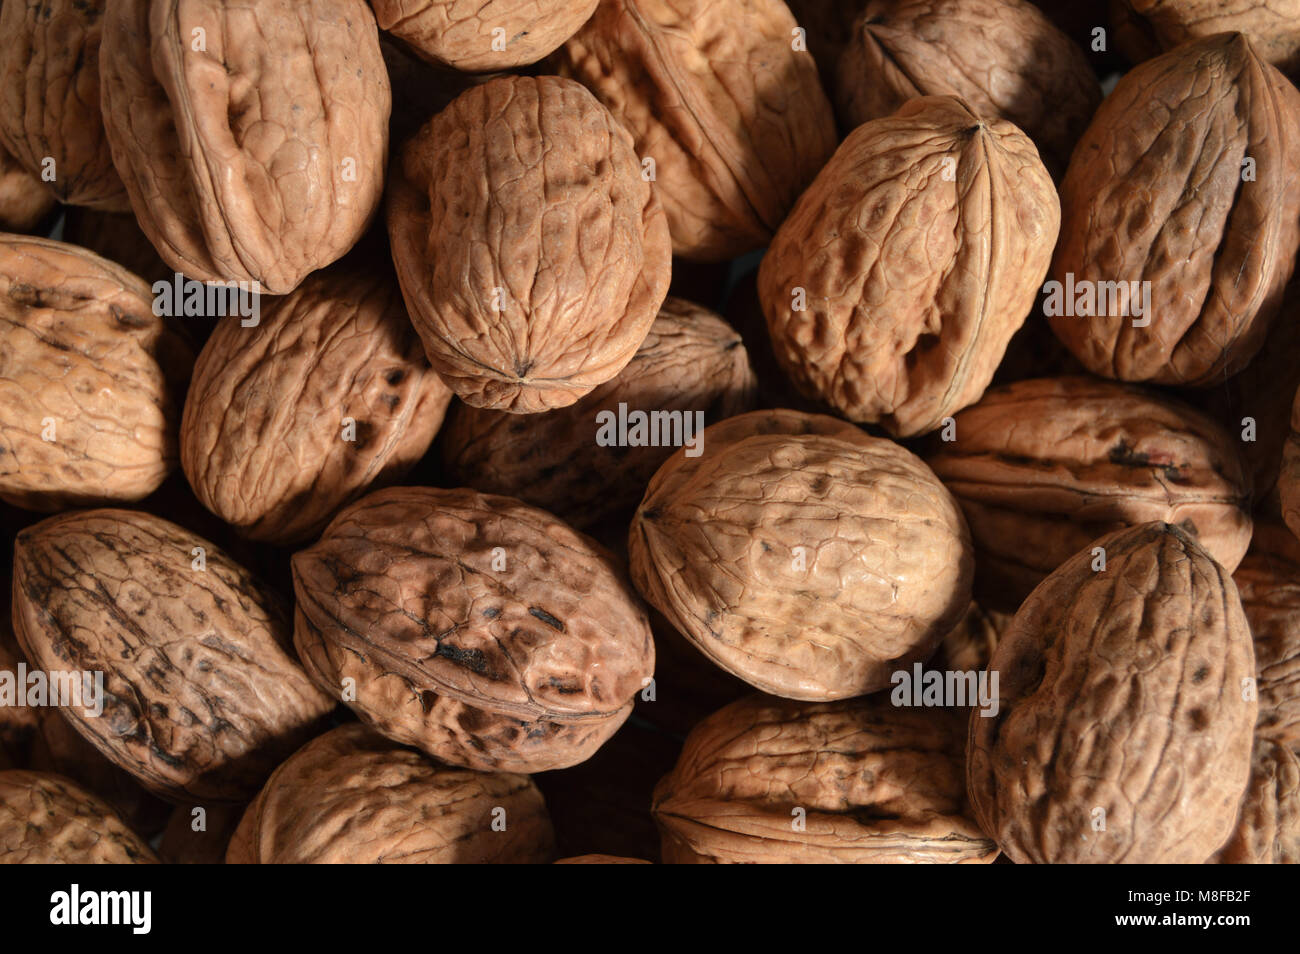 background with walnuts in shell Stock Photo